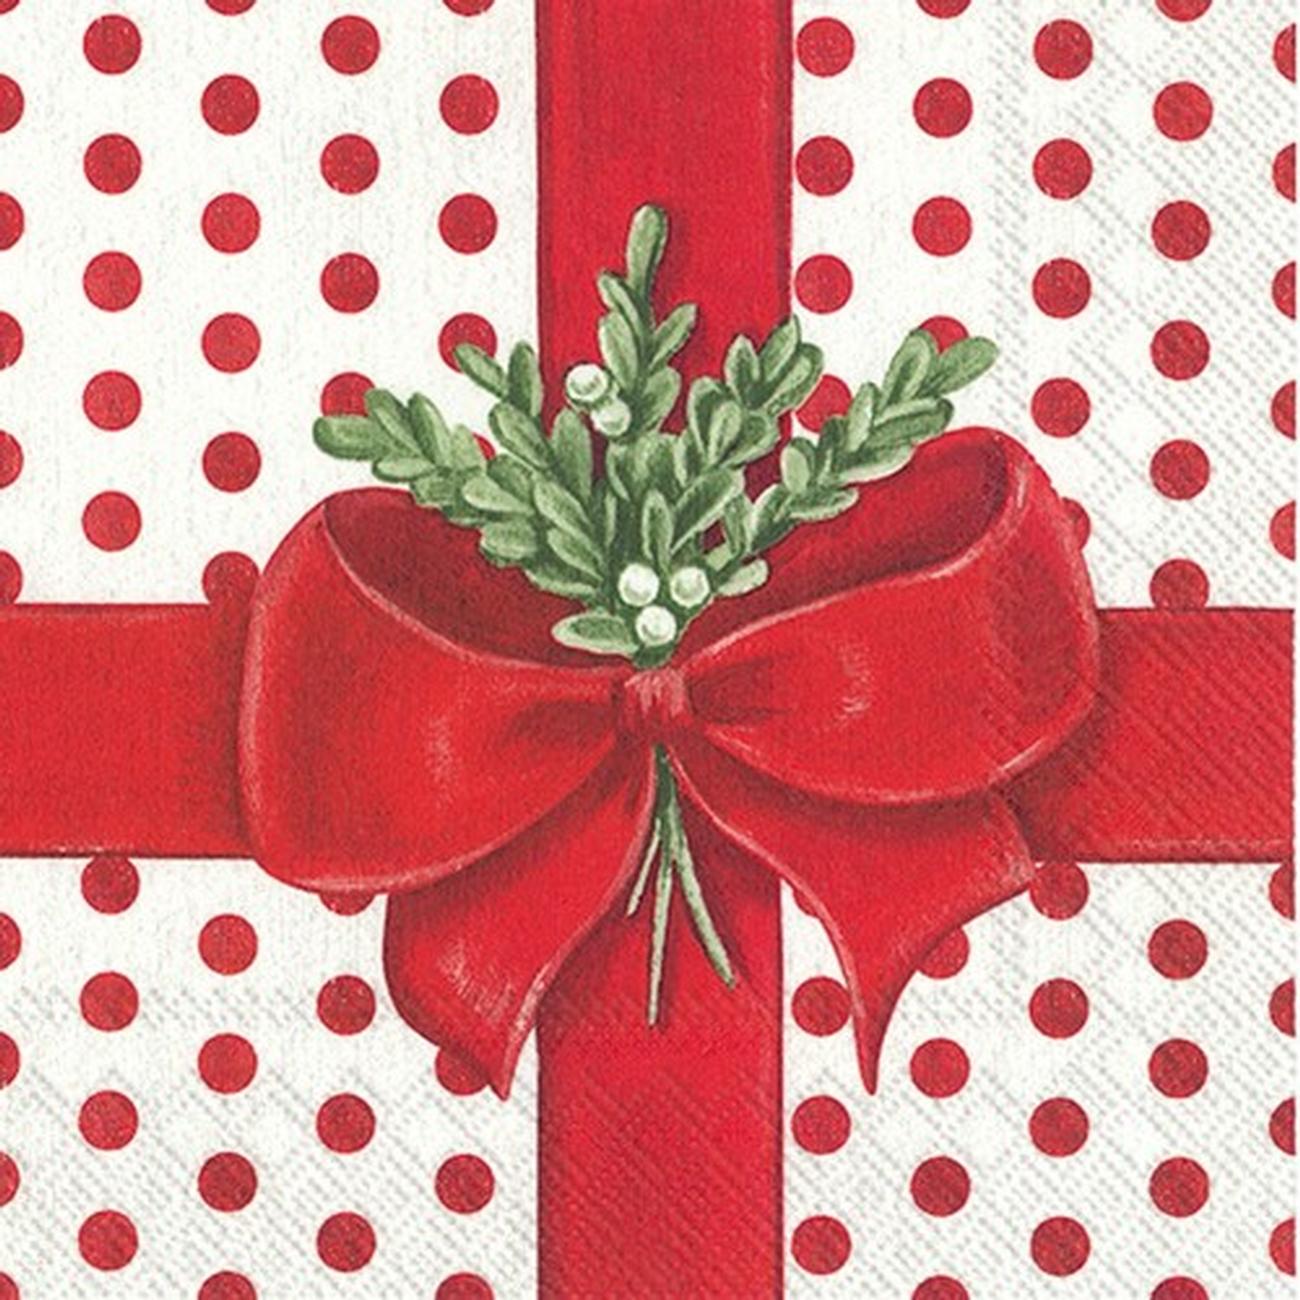 ihr-lunch-napkin-a-present-for-you-red-white - IHR Lunch Napkin A Present For You Red White